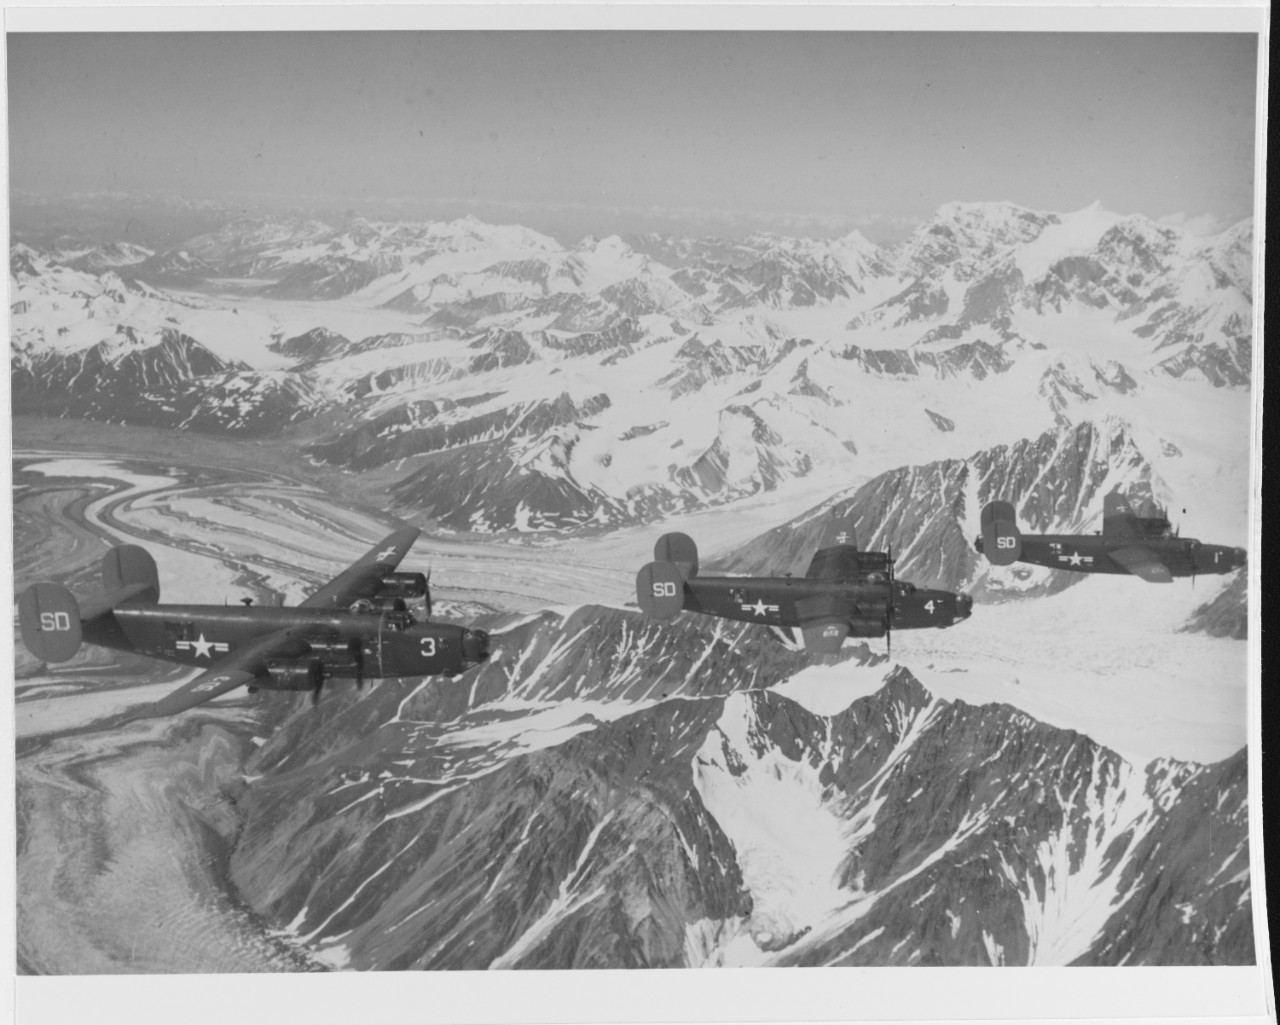 Consolidated PB4Y-1P, Patrol bombers, of VAP-61